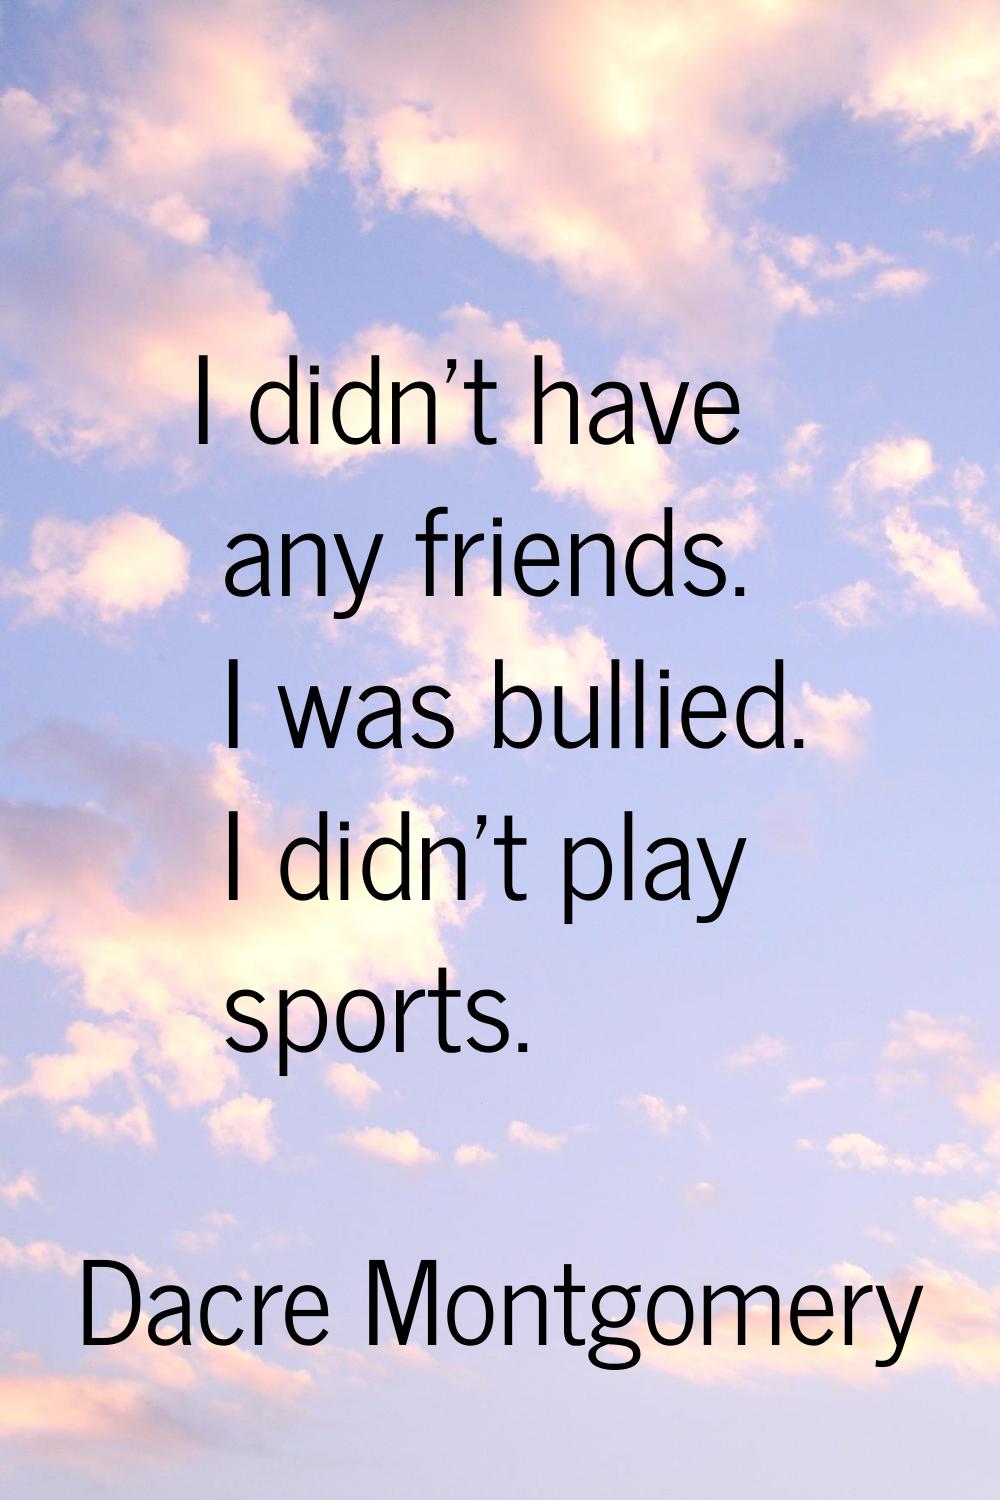 I didn't have any friends. I was bullied. I didn't play sports.